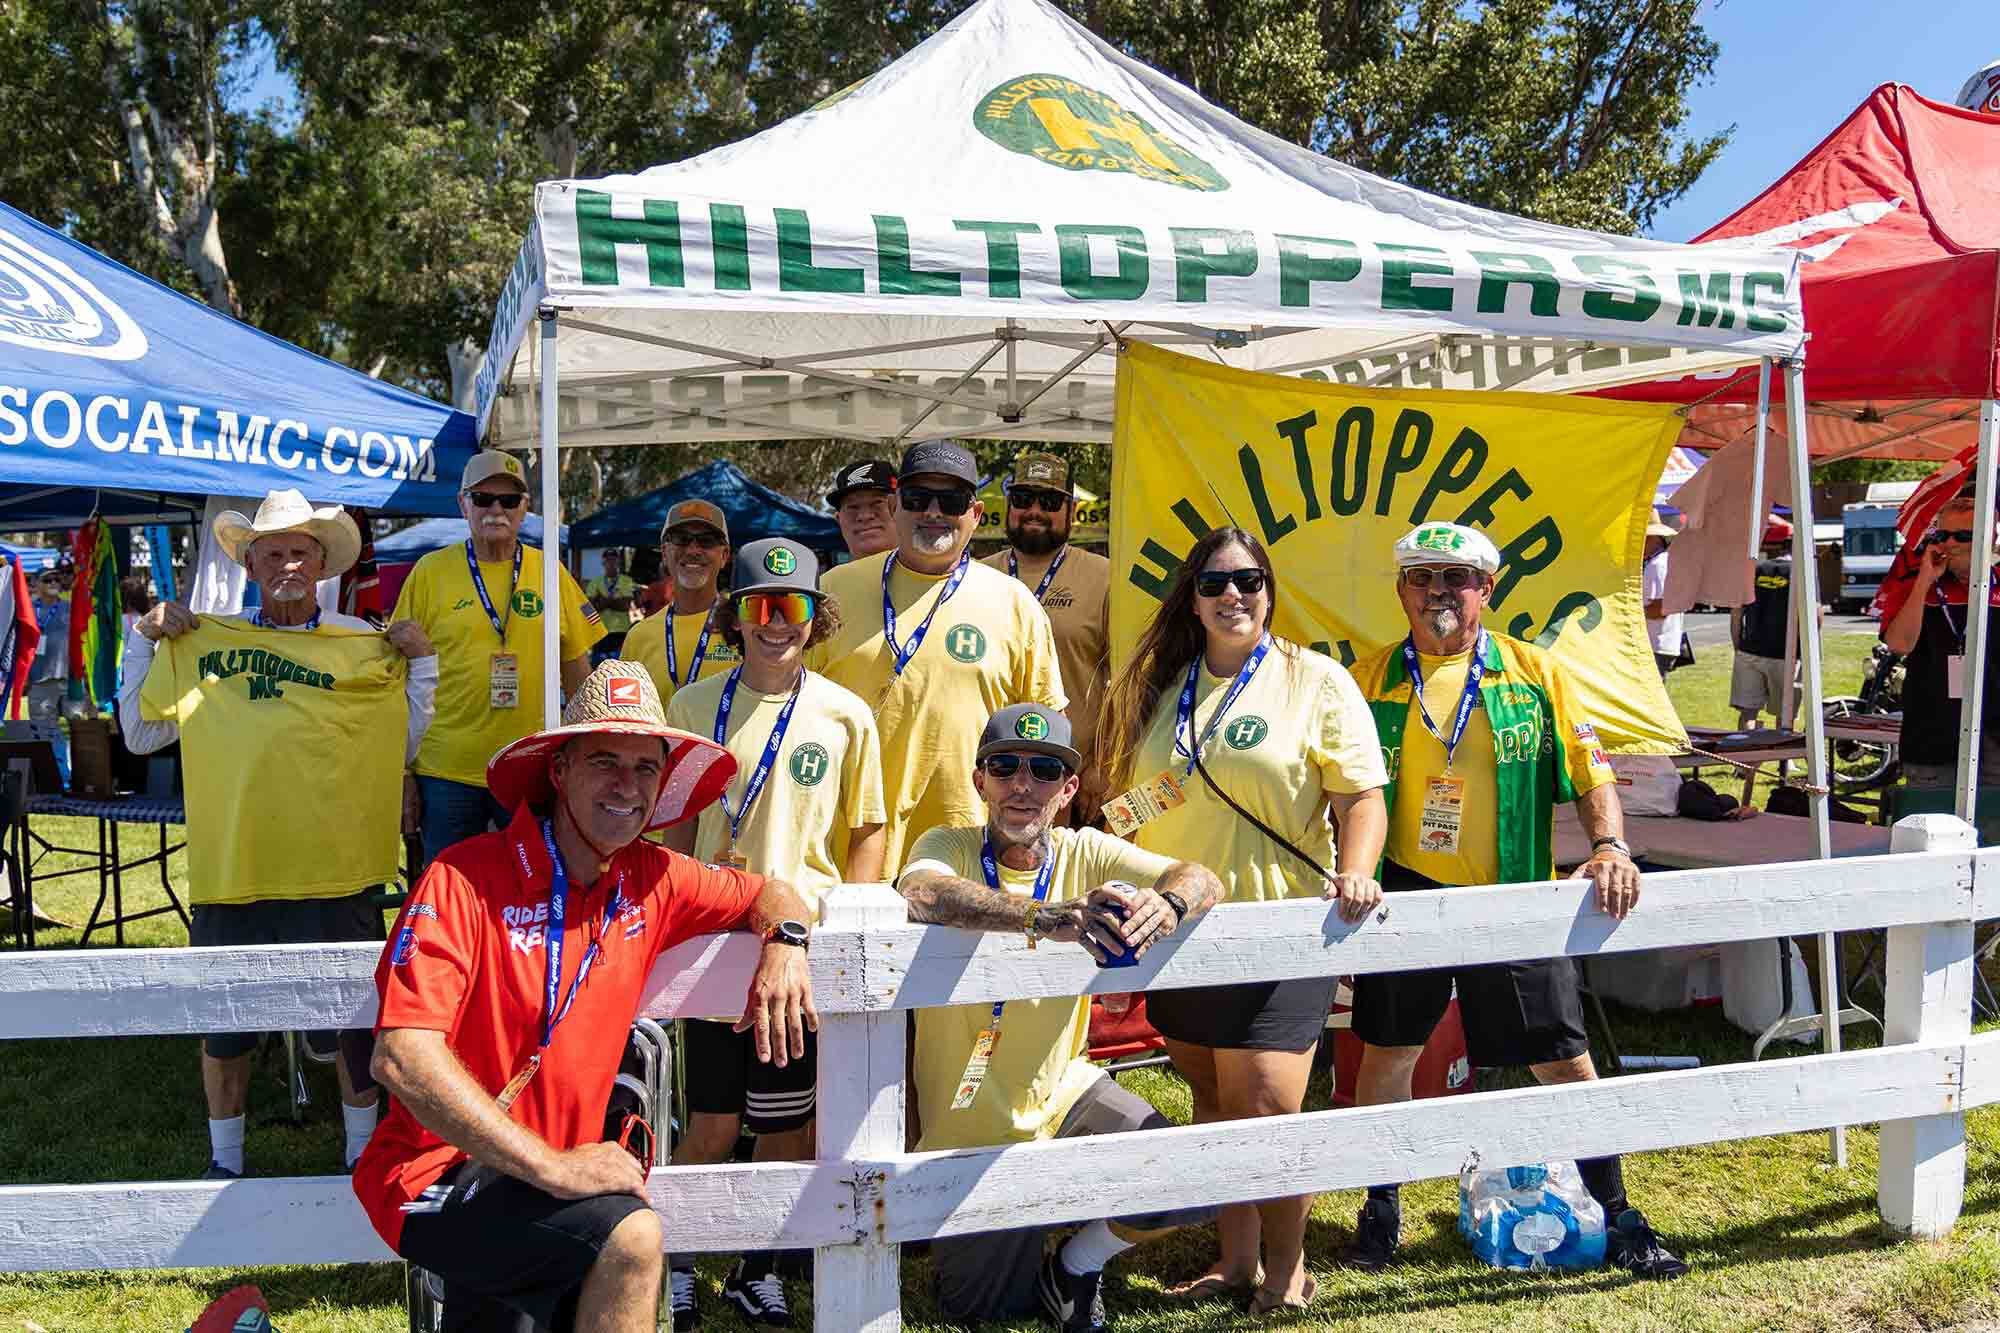 “Our goal was to bring in the clubs and associations that are the backbone of the sport,” said Johnny Campbell, here with AMA District 37 club Hilltoppers MC. “We wanted to see as many clubs as possible join us.”